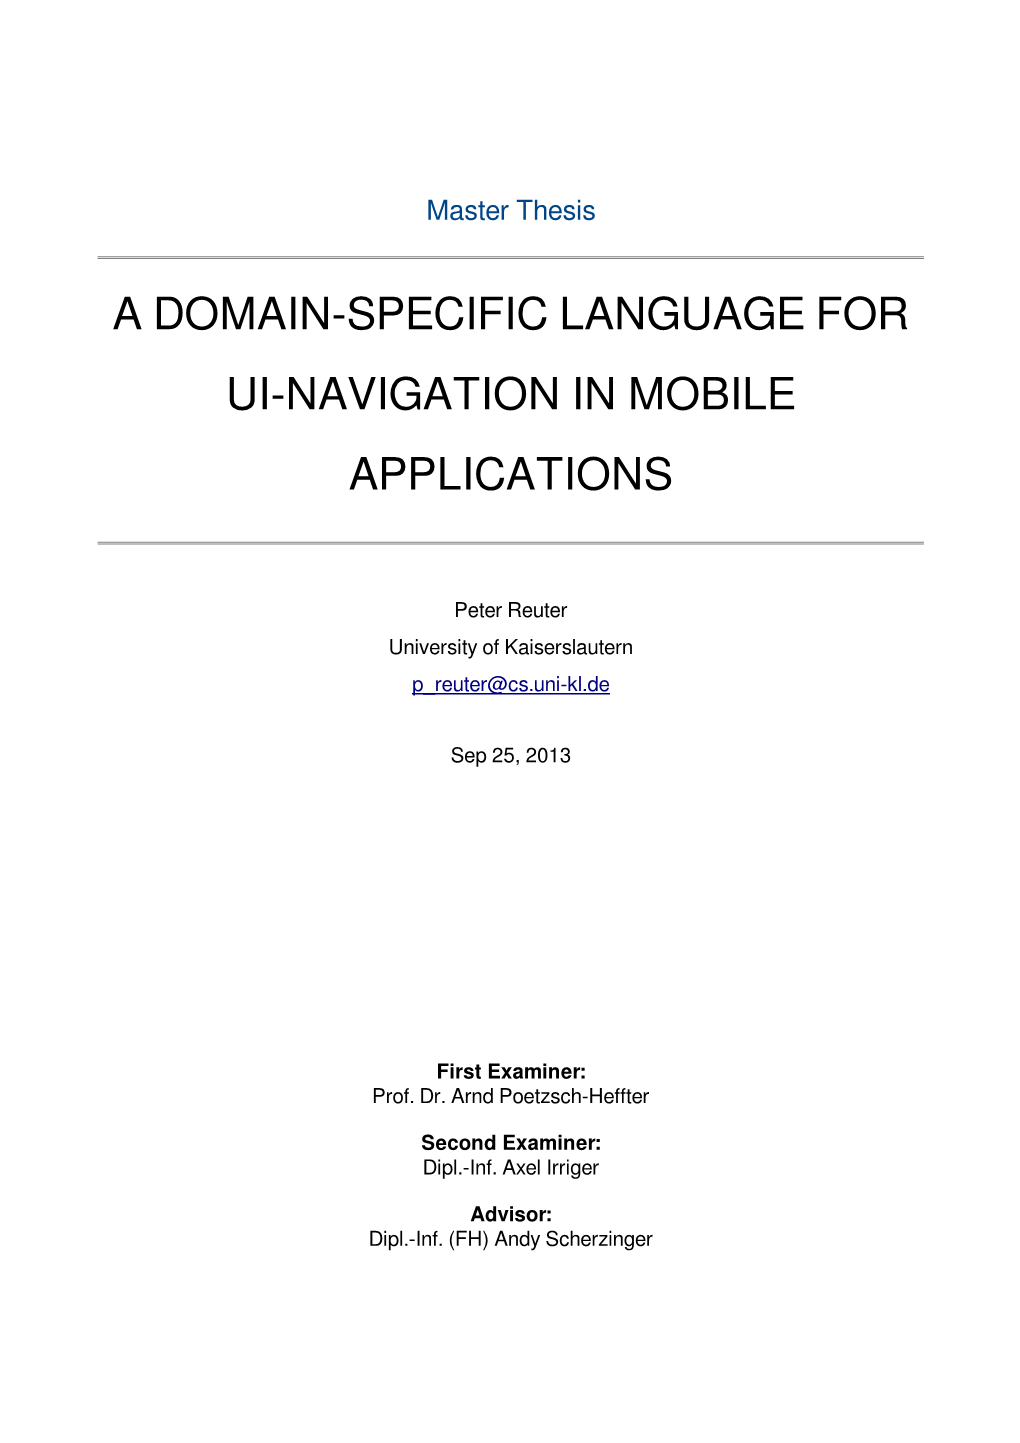 A Domain-Specific Language for Ui-Navigation in Mobile Applications